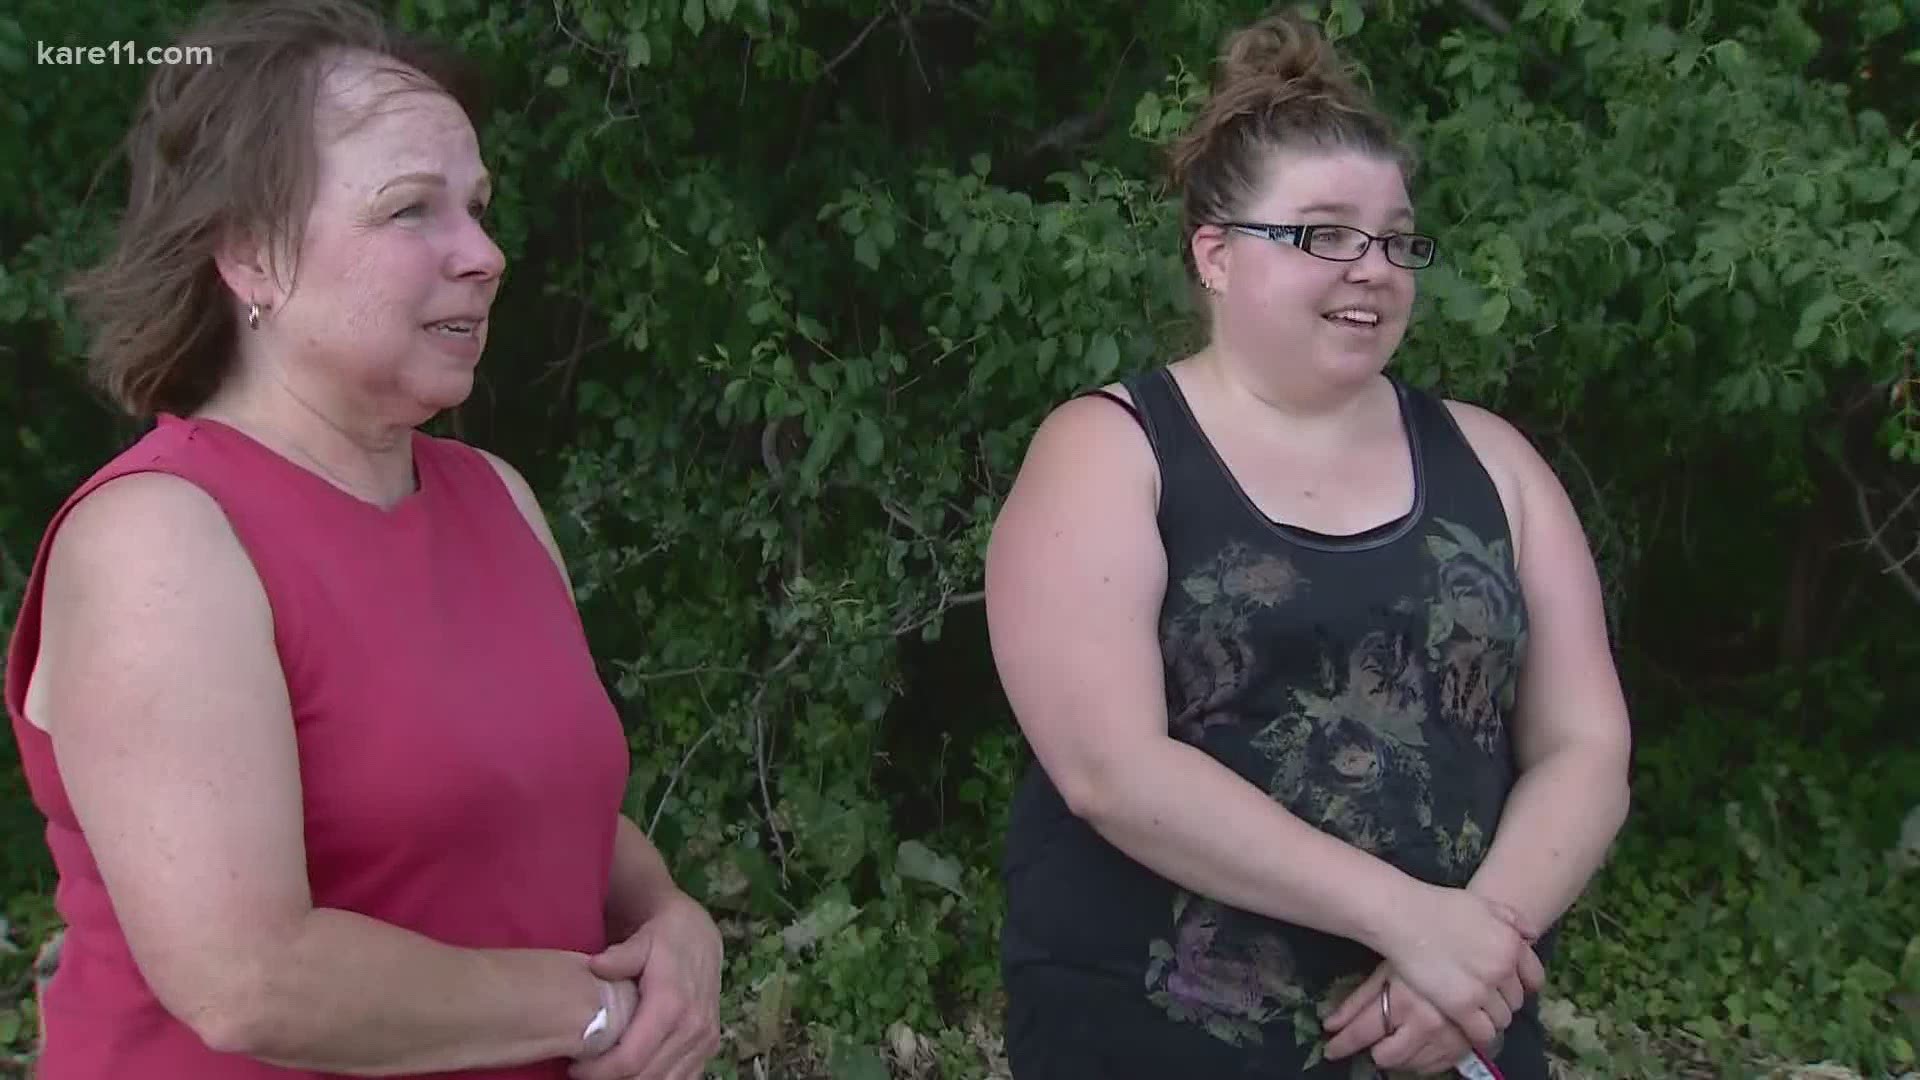 Sue and Leanna Peterson discovered Donald Wieberdink who had been missing for more than 24 hours